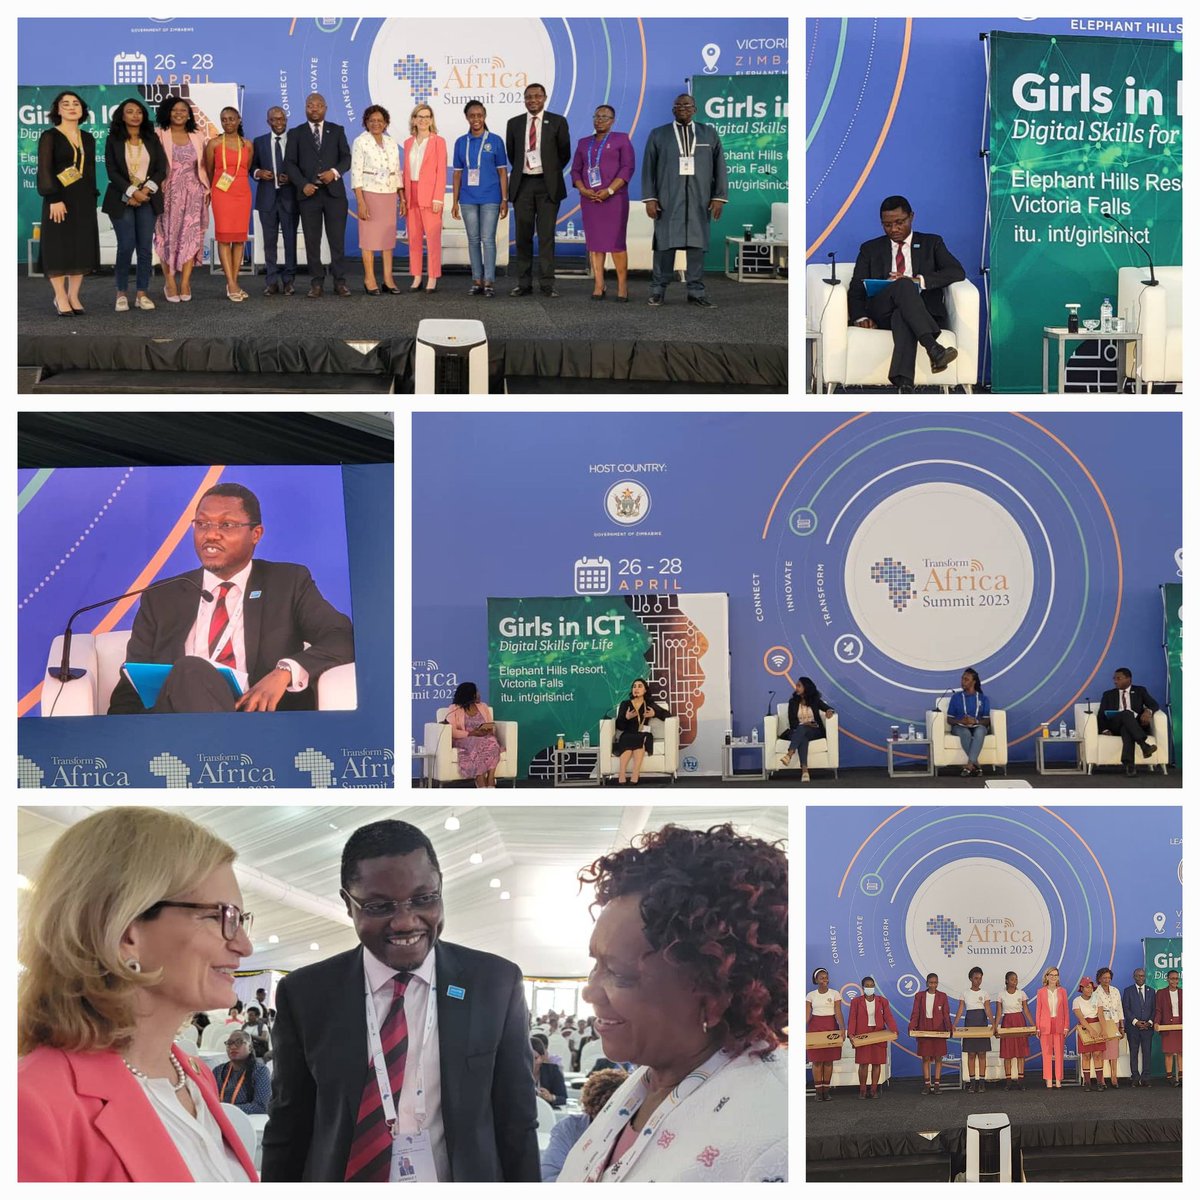 Very exciting session on #GirlsInICT at #TAS2023 where I highlighted the interlinkages of #Energy, #SmartDevices, #Connectivity, #LearningContent, #AffordableData & #YouthParticipation to #ReimagineEducation for #Girls & #Boy. 

@UNICEFEducation @UNICEFinnovate @UNICEFZIMBABWE